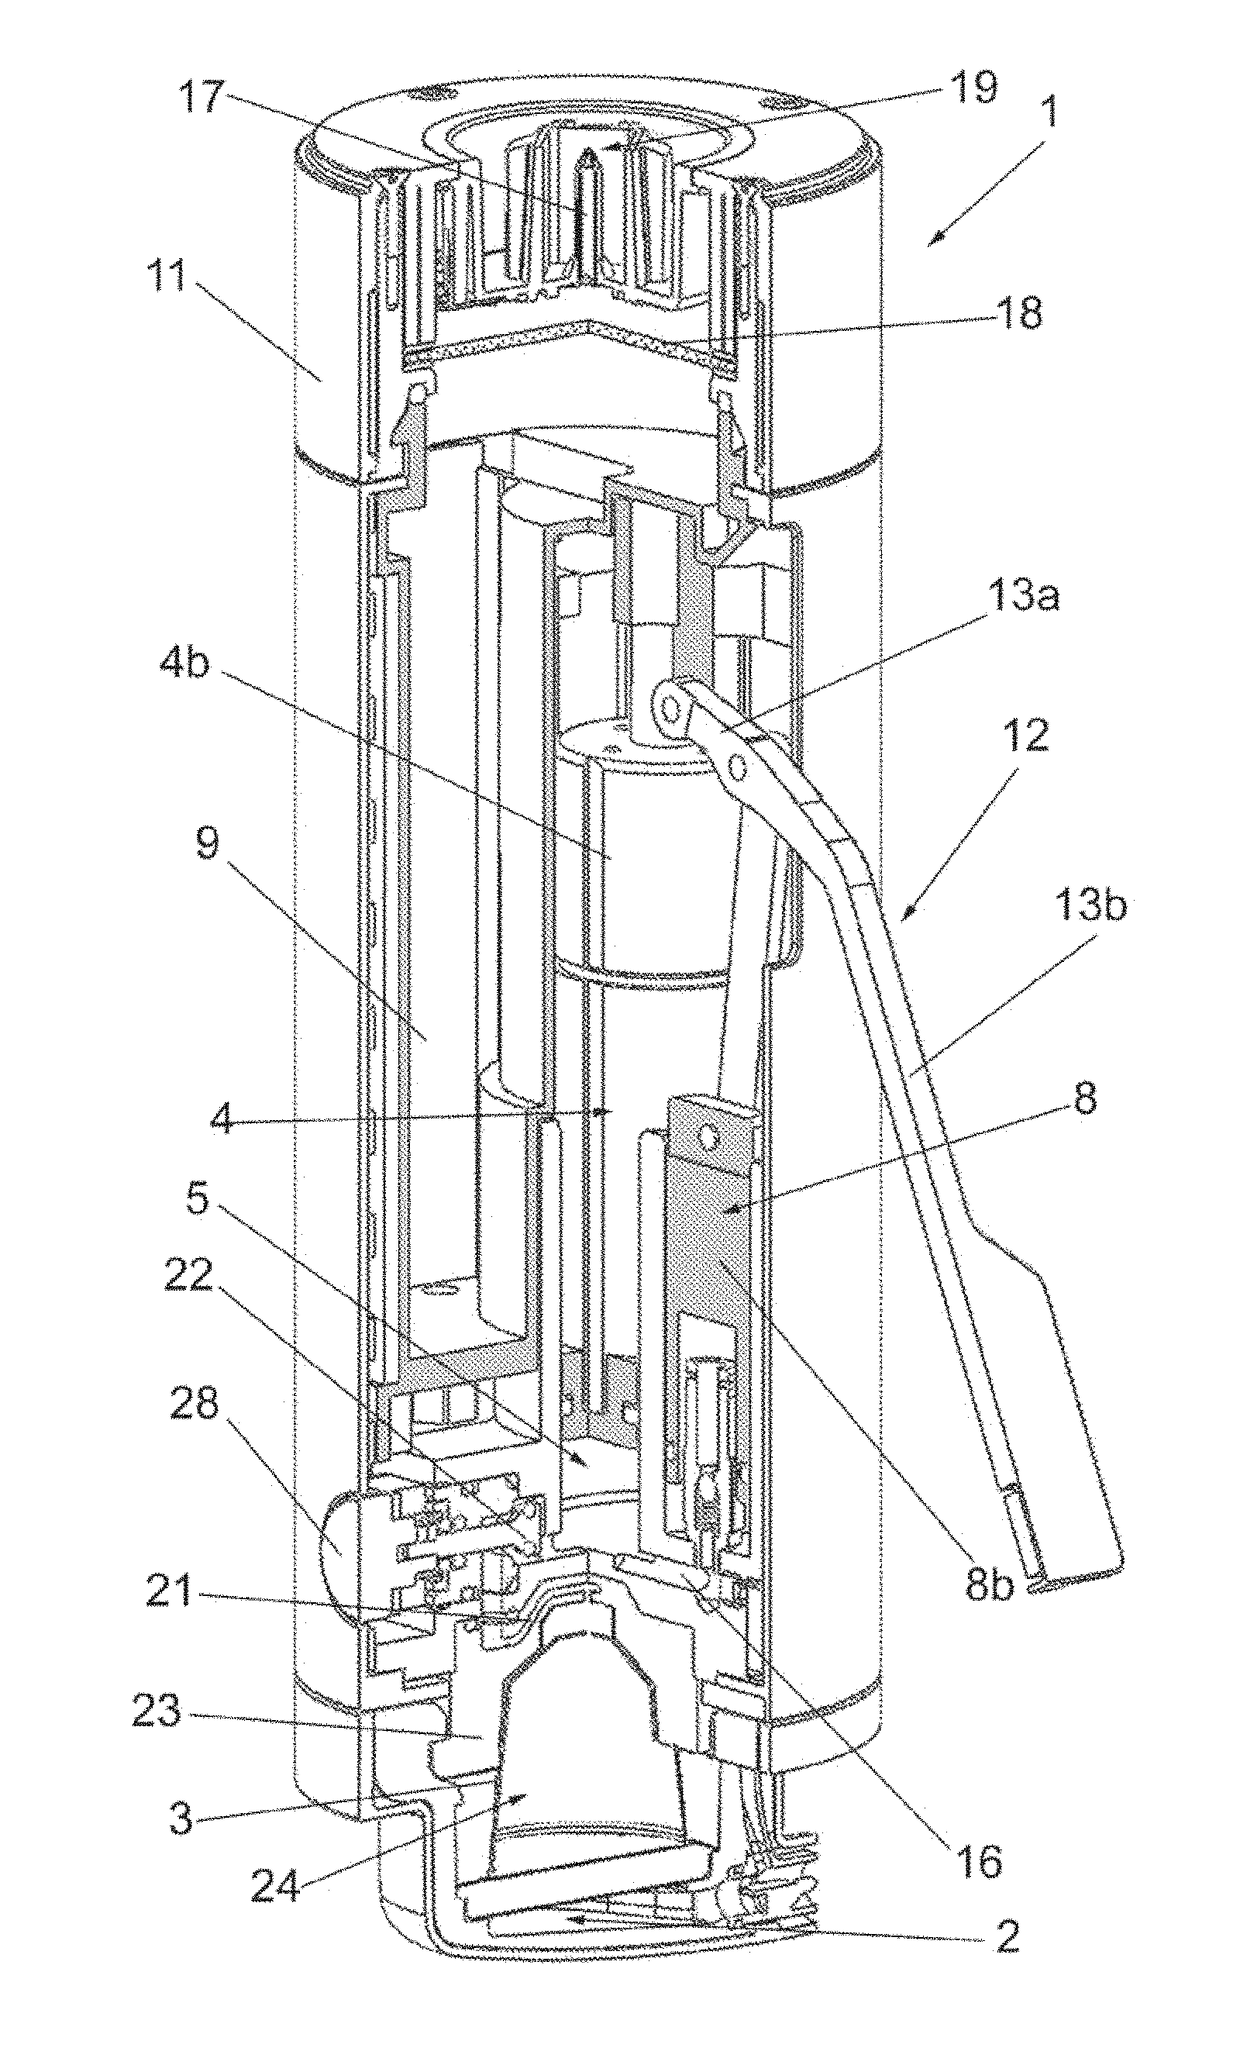 Machine for preparing a drink and method for preparing a drink using such a machine